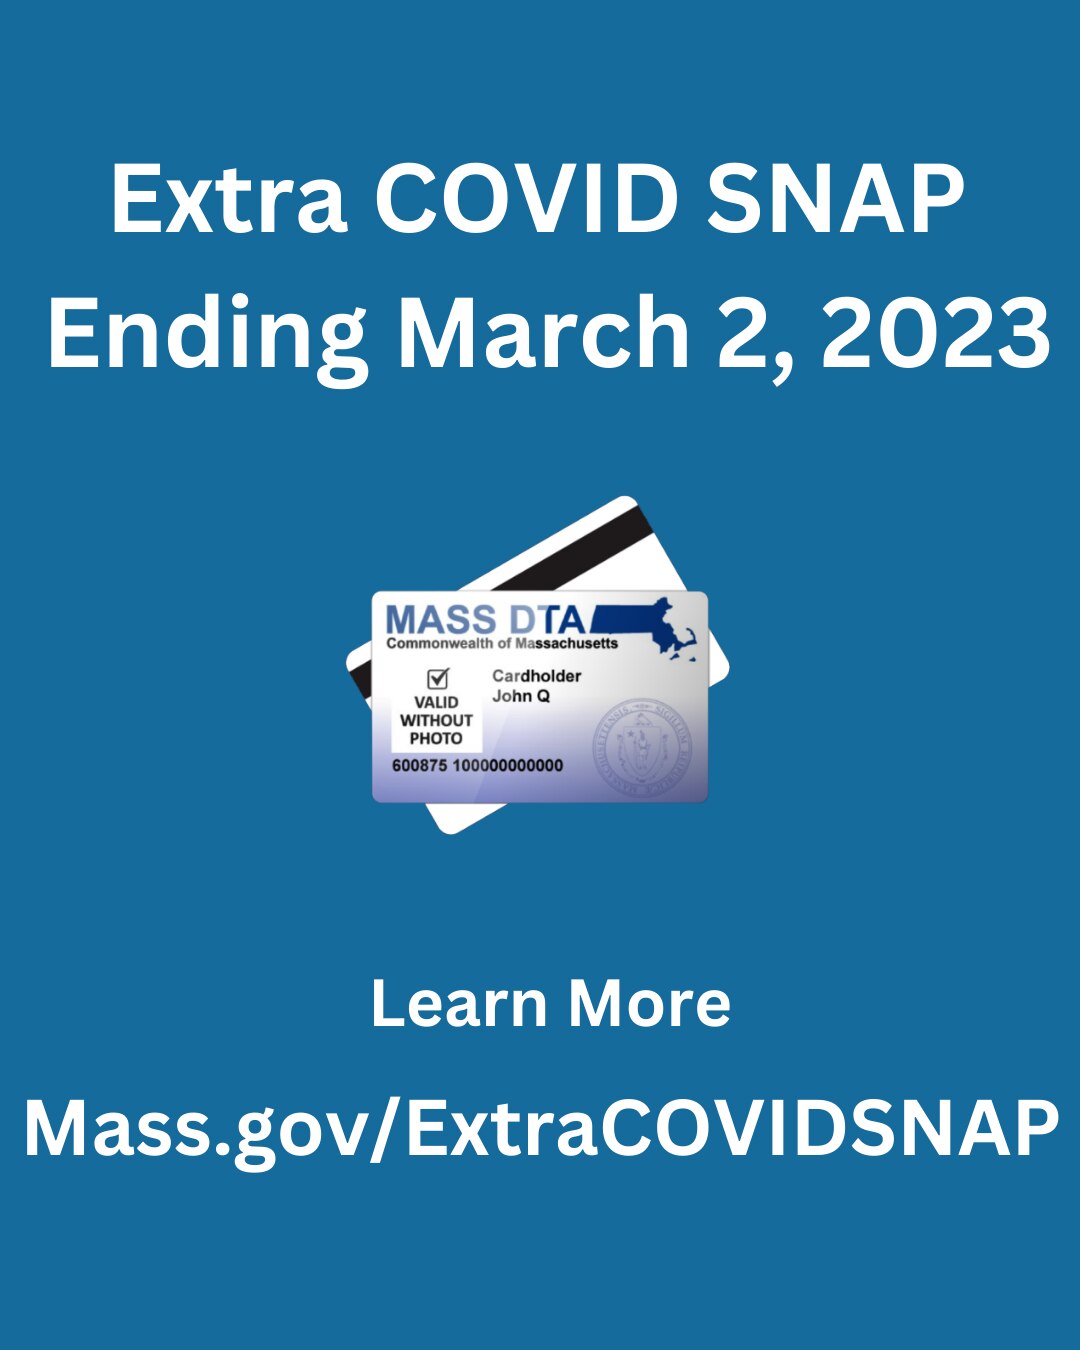 Graphic of an ebt card saying the extra covid SNAP is ending and includes the link to Mass.gov/ExtraCOVIDSNAP